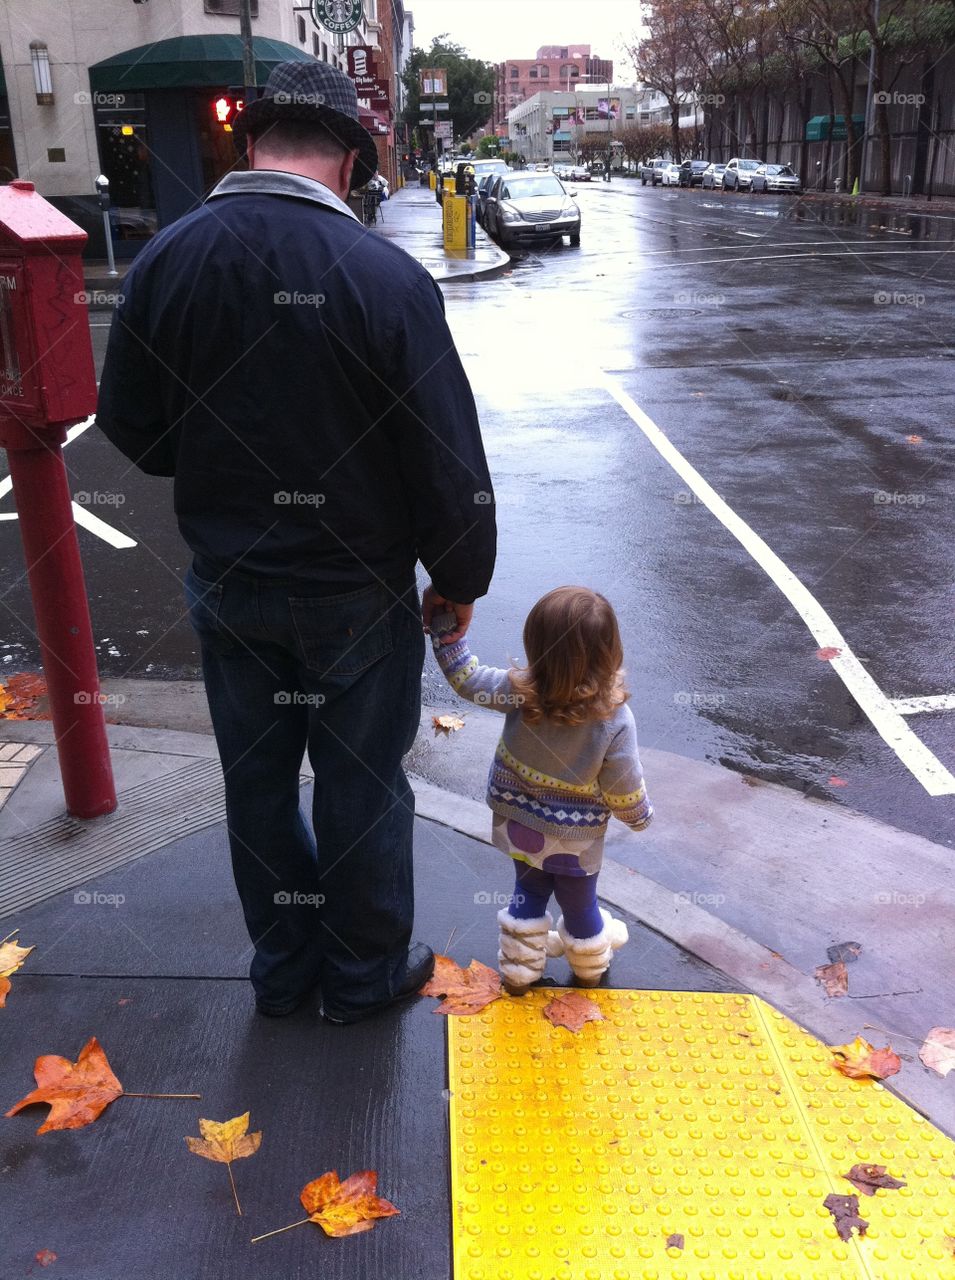 Holding hands. Cute shot of my dad and cousin in San Francisco on our yearly December trip!